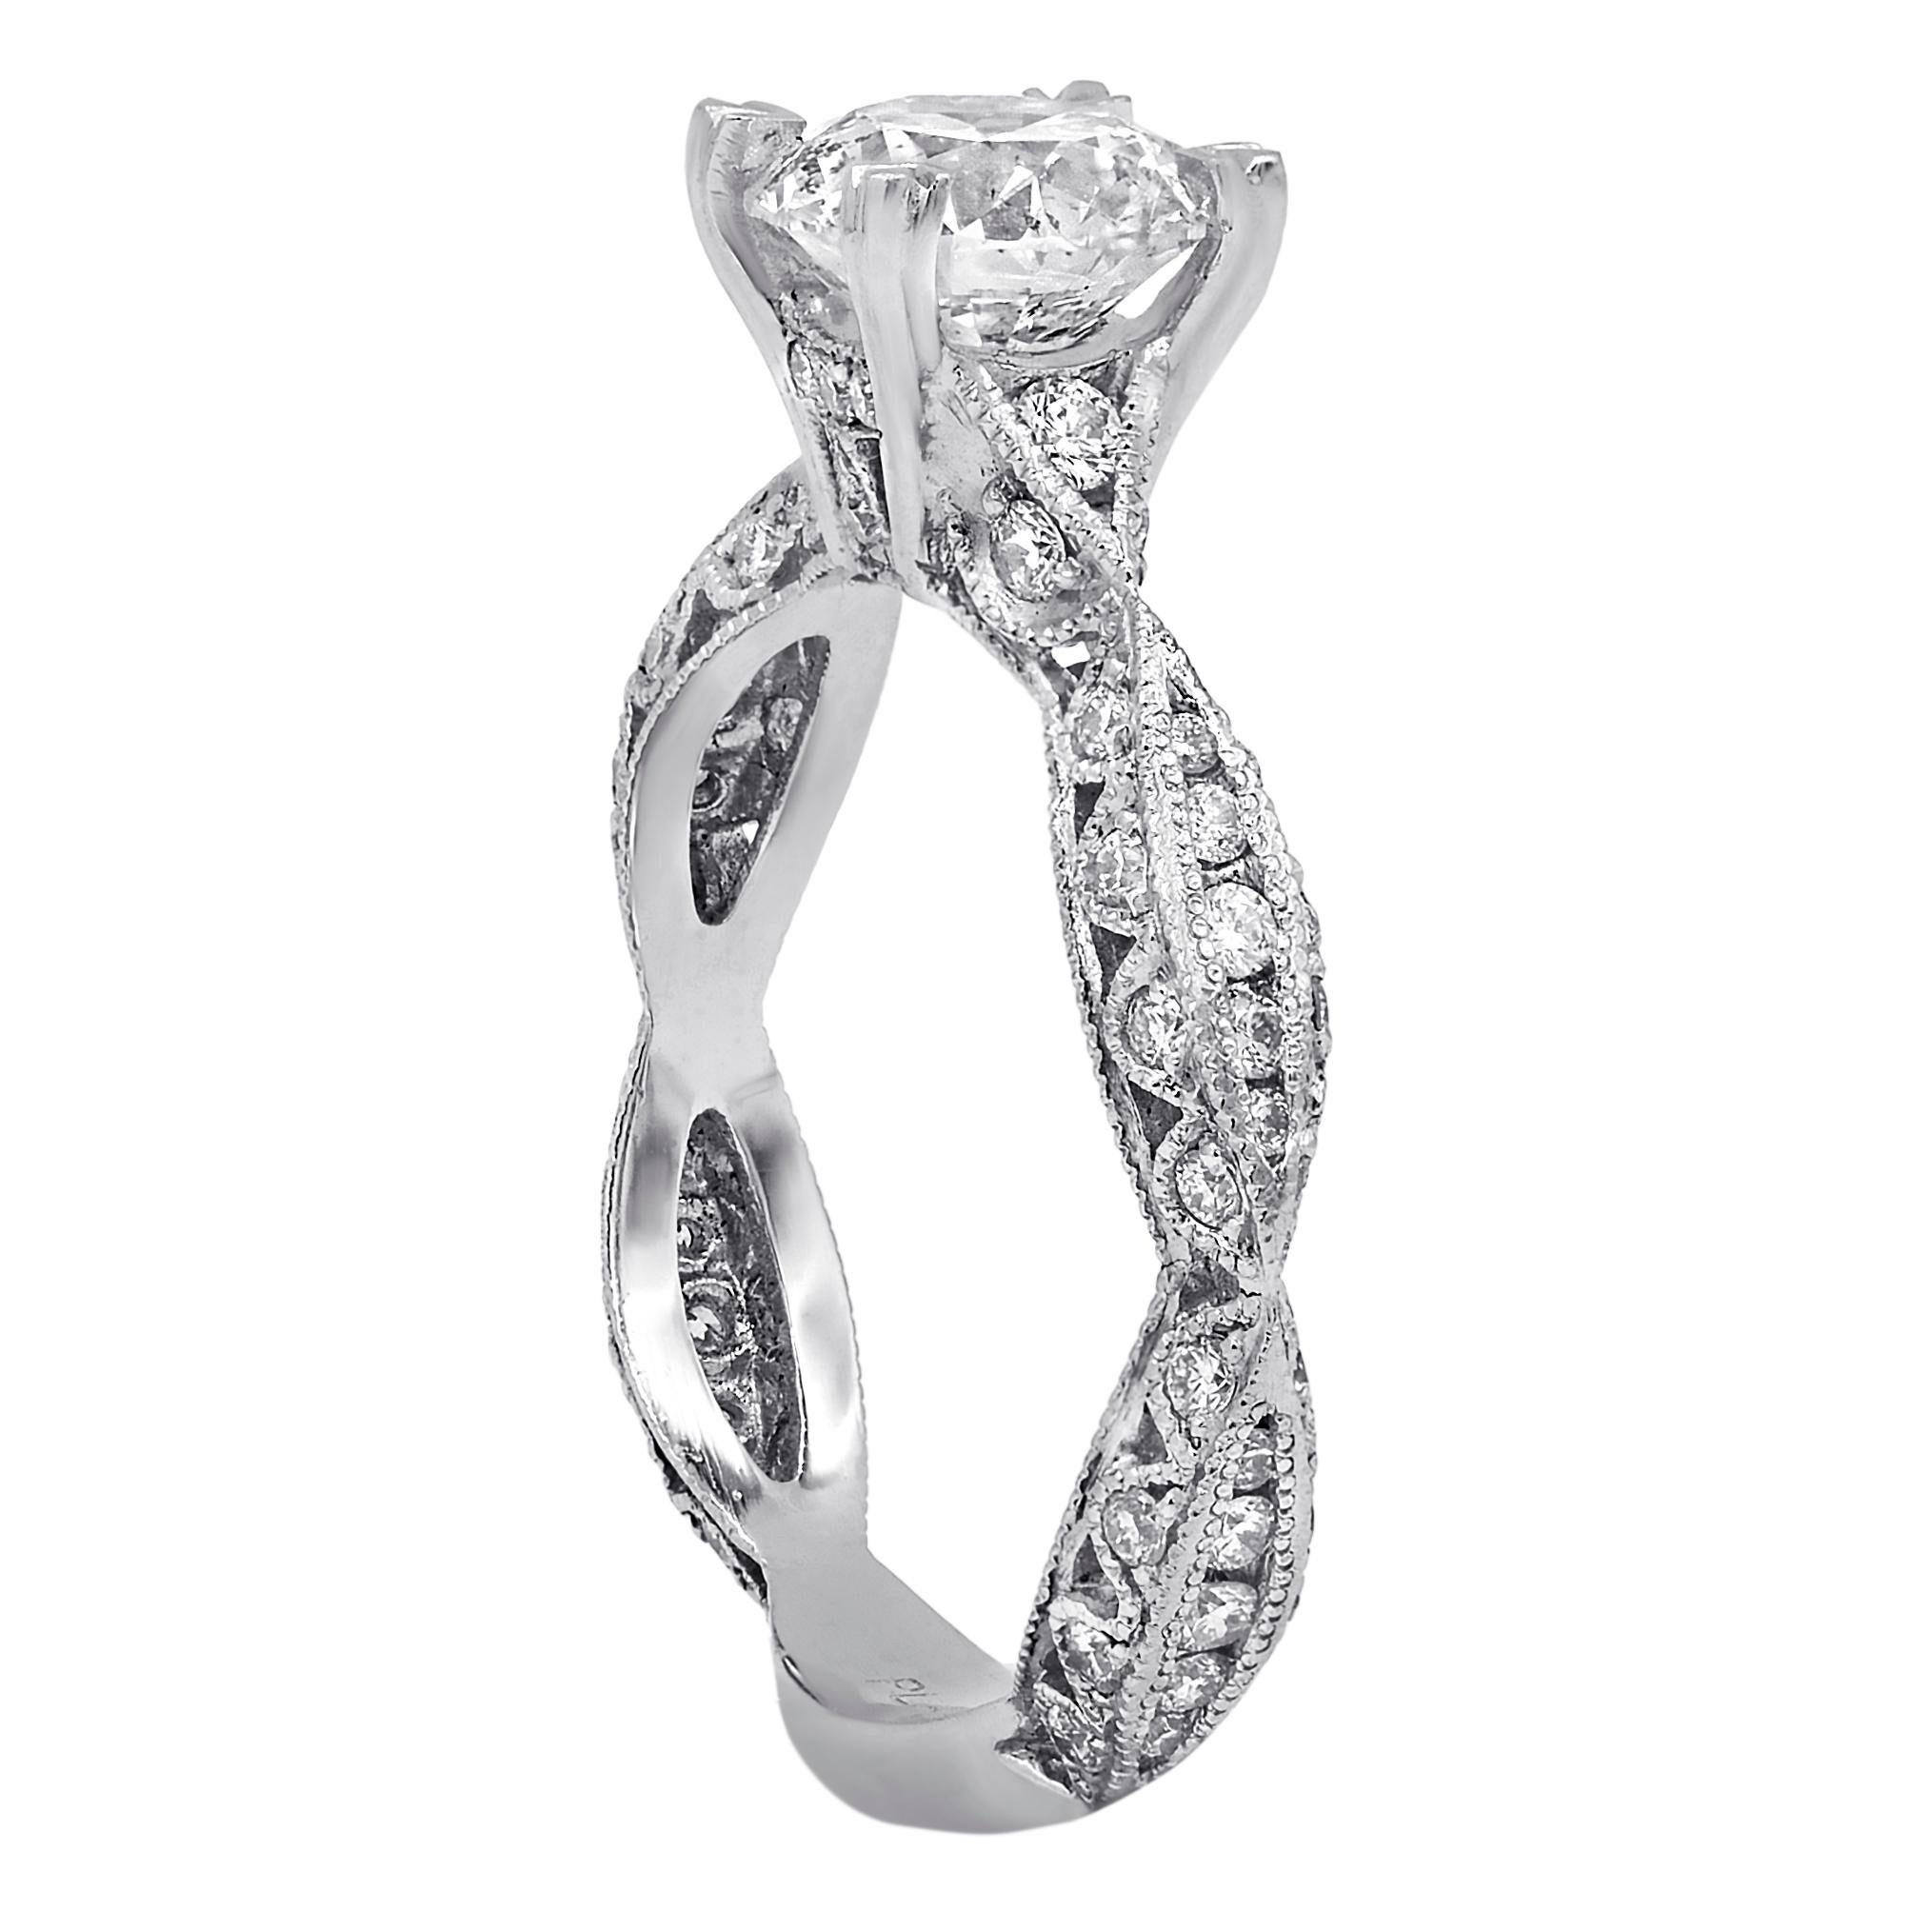 Diamond engagement ring with egl certified 1.51 ct f-si1 (rdc3425) set with micropave diamonds (.70ct) all the way around in filigree twisty platinum setting.
